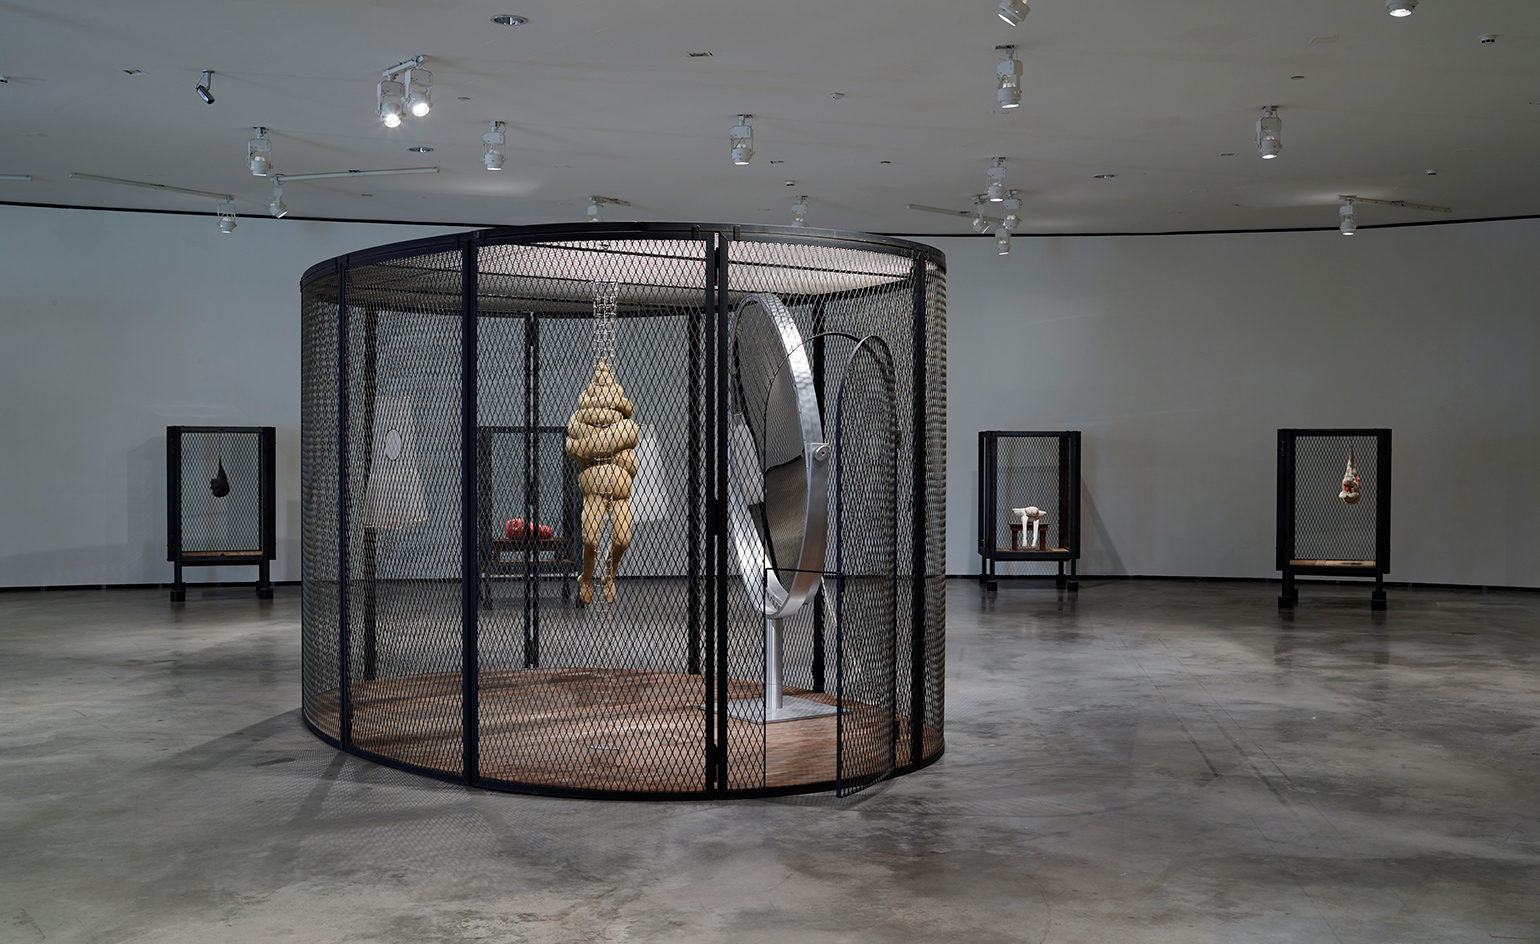 Louise Bourgeois' Cell works at Guggenheim, Bilbao